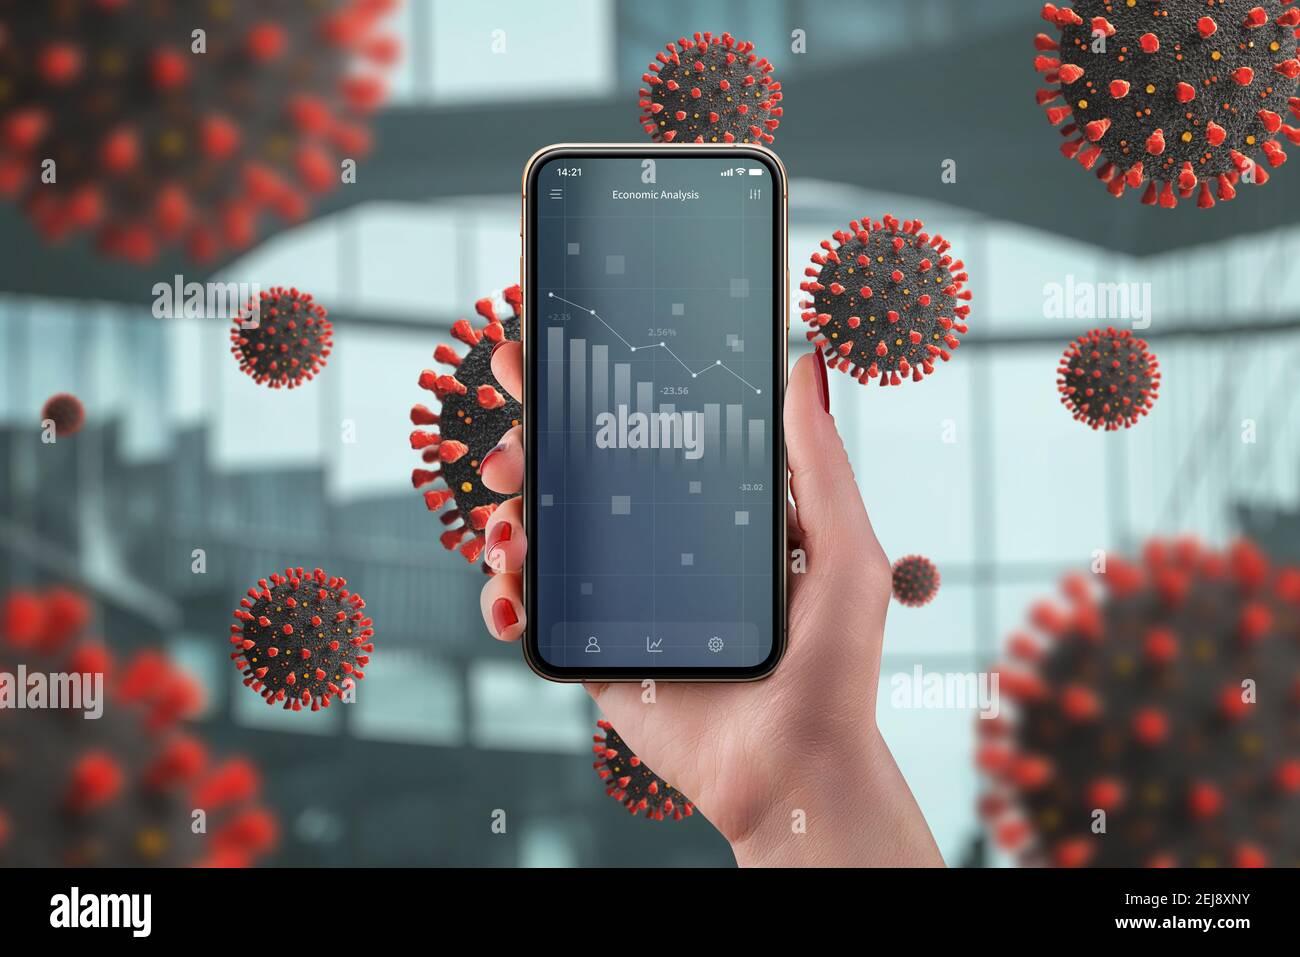 Concept of economic decline under the influence of the corona virus epidemic. Hand holds a mobile phone with economy stats. Coronavirus virions surrou Stock Photo